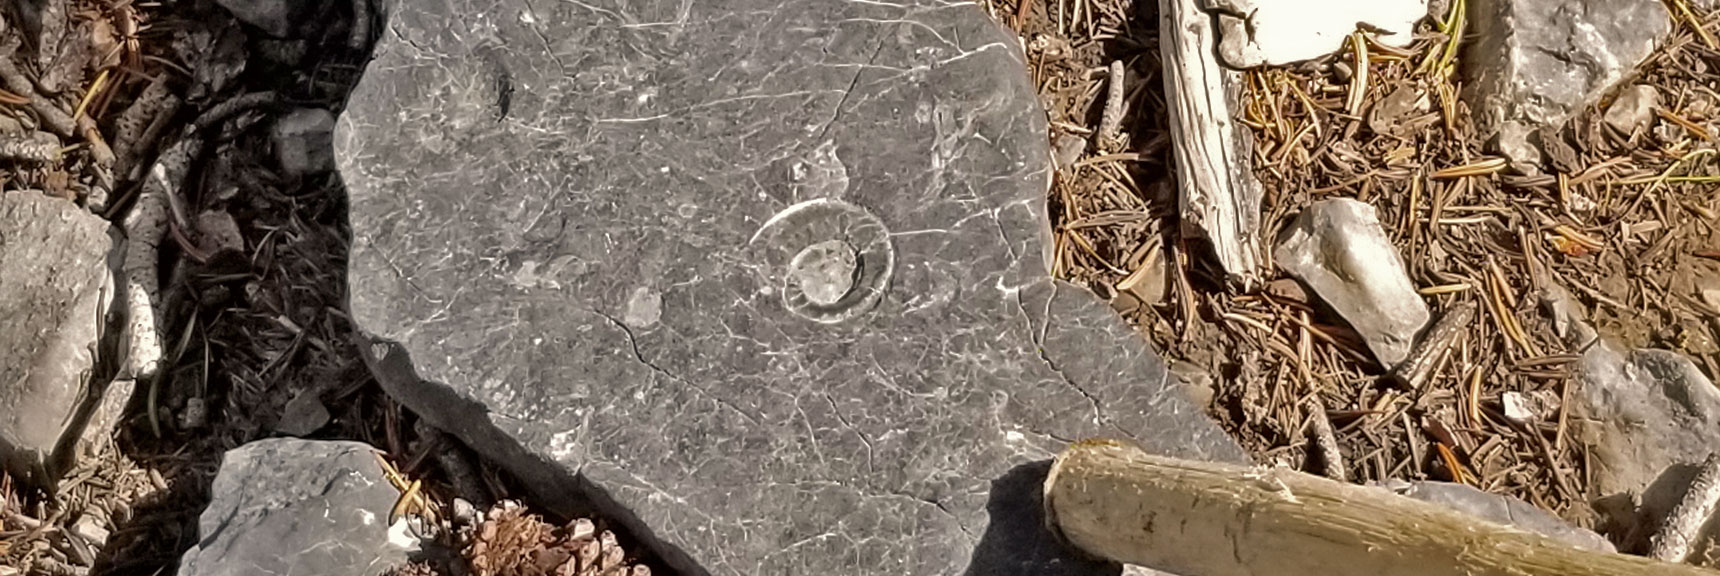 Surprise! 450M-Year-Old Nautilus Shell Fossil + Trilobites from Ancient Sea Bed, Now near 11,000ft! | Grand Circuit Loop Cougar Ridge Trail, Mummy Mountain Knees | Mummy Mountain Toe | Mummy Springs | Raintree | Fletcher Peak | Mt Charleston Wilderness | Spring Mountains, Nevada